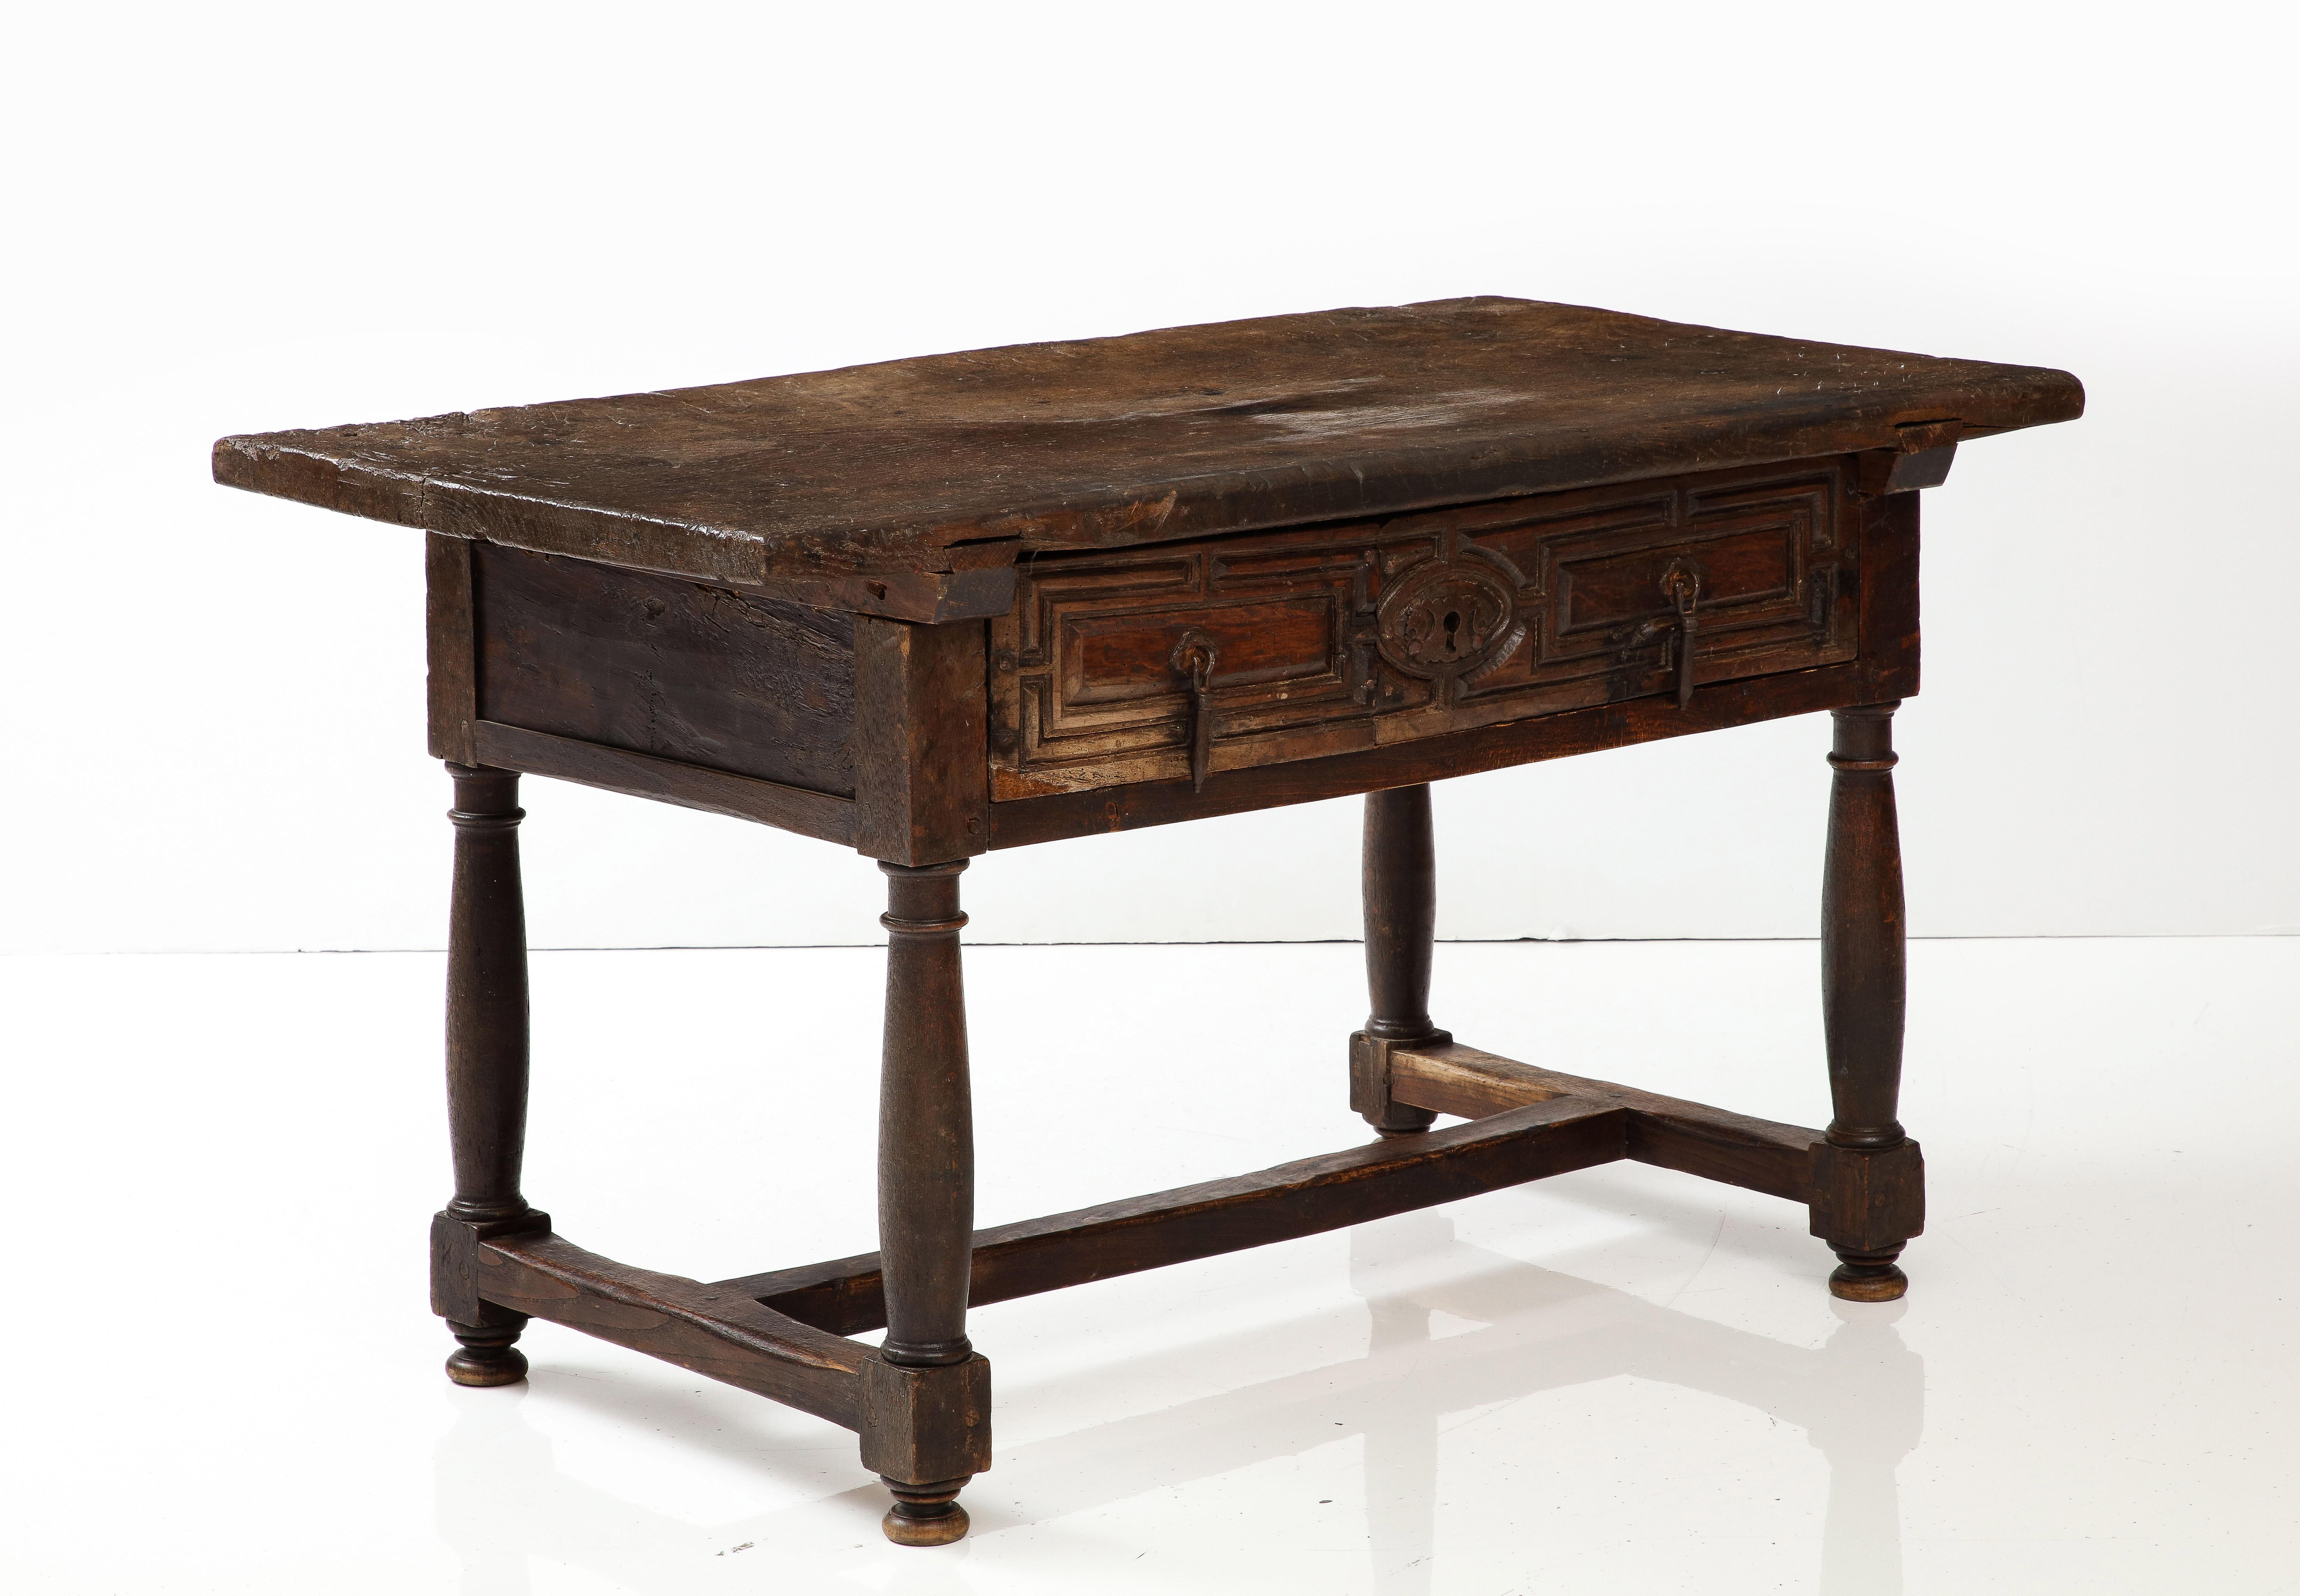 Late 16th C. Spanish Walnut Table with Iron Pulls & Drawers For Sale 6